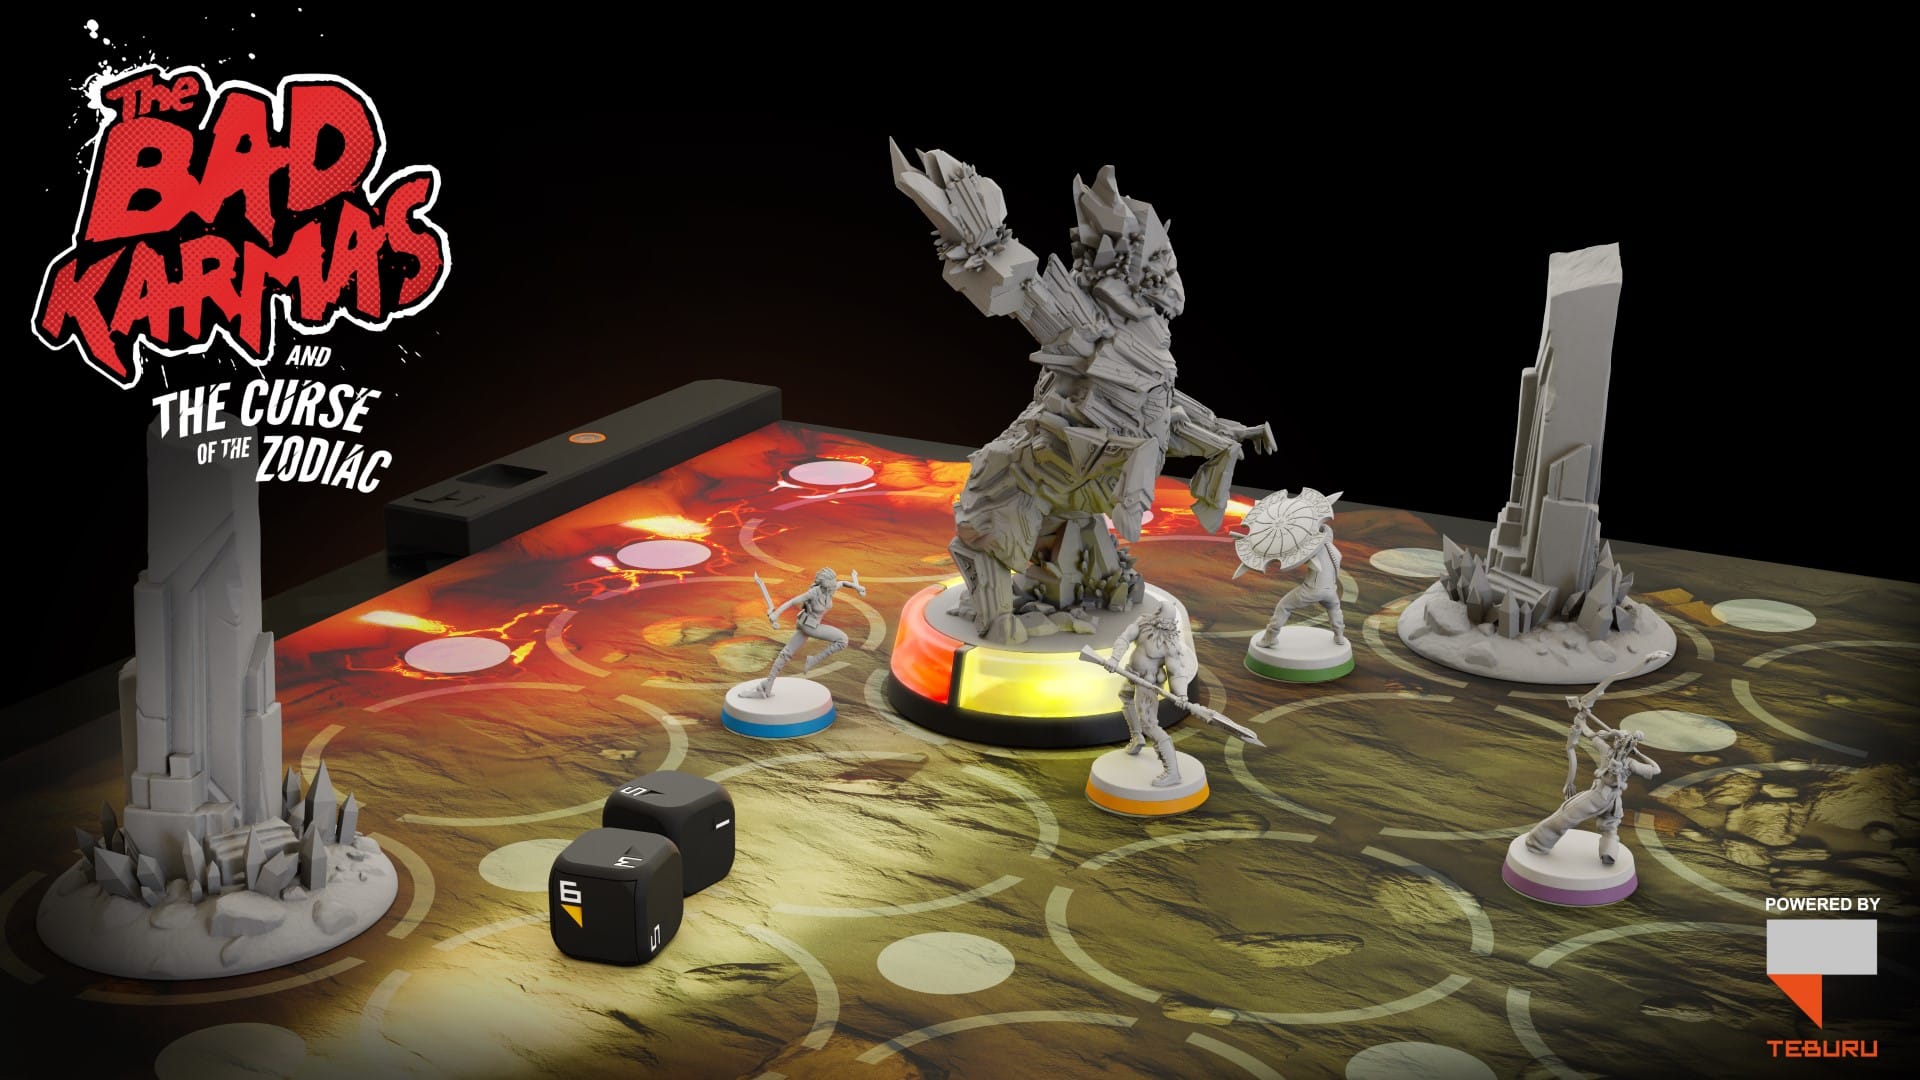 a promotional image of the Curse of the Zodiac game